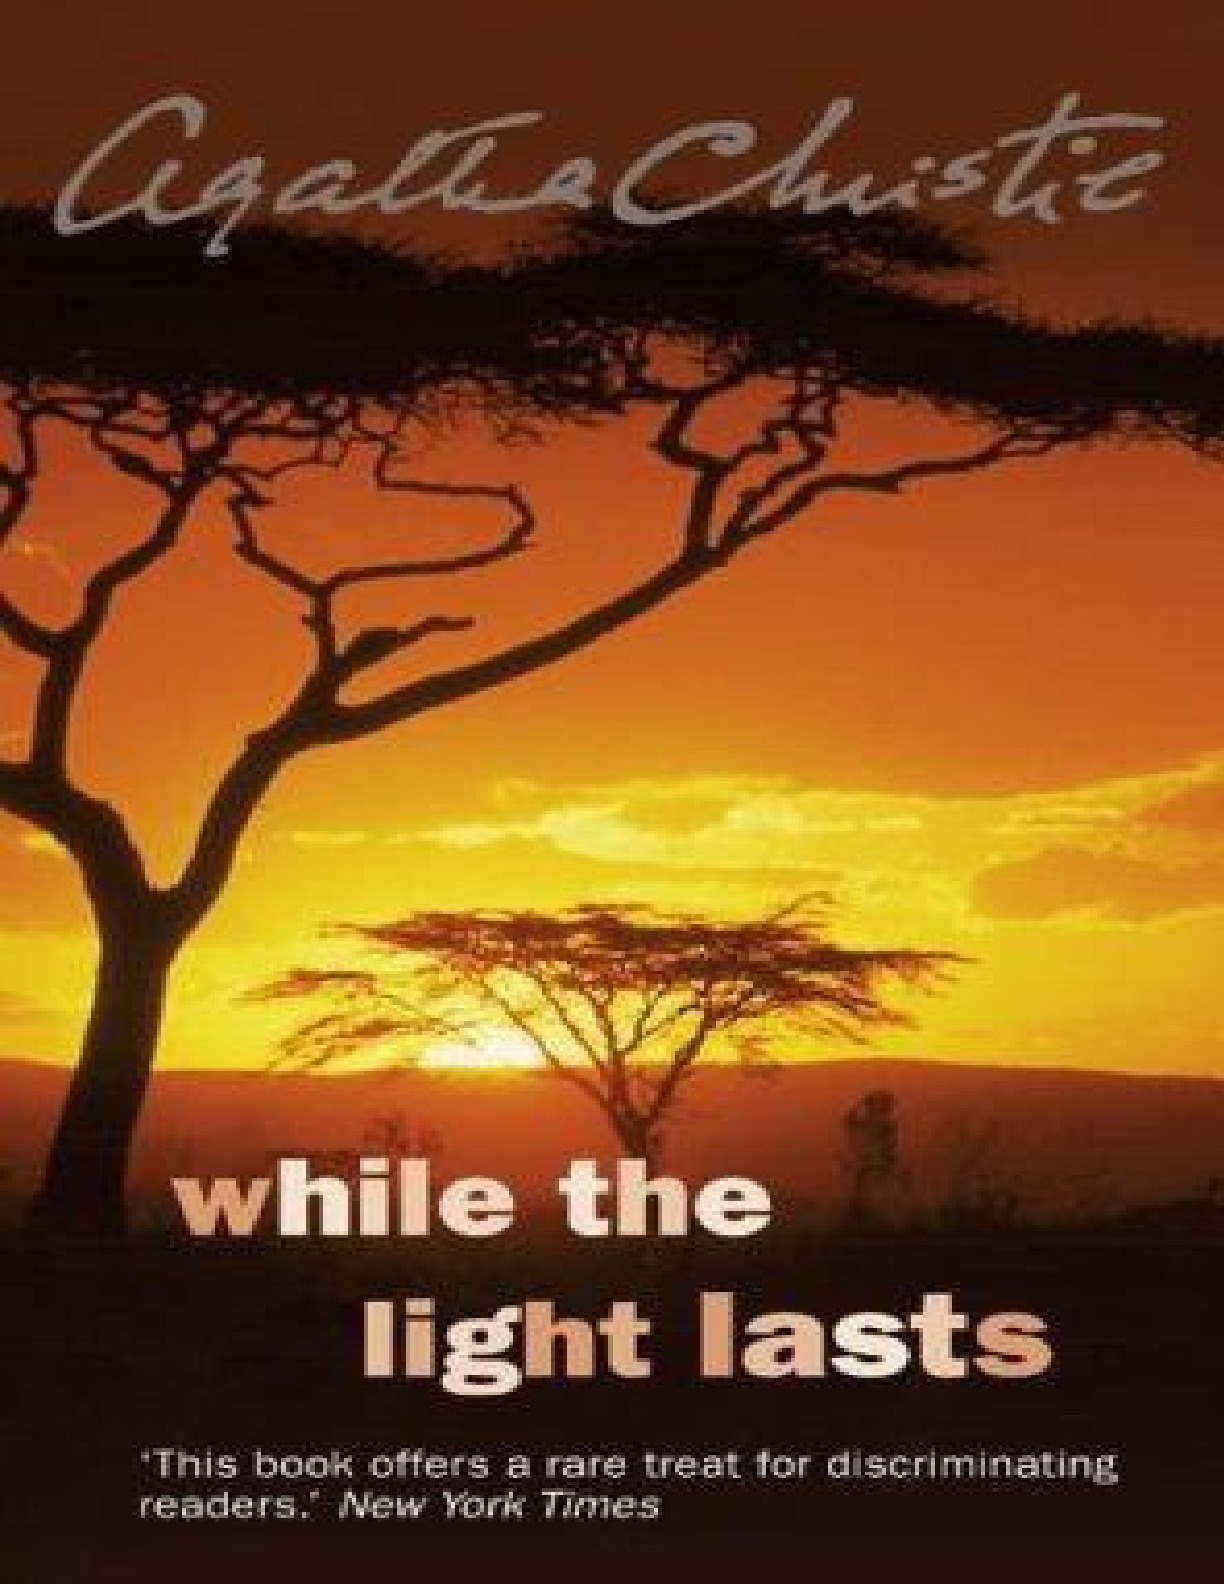 While the light lasts – Agatha Christie